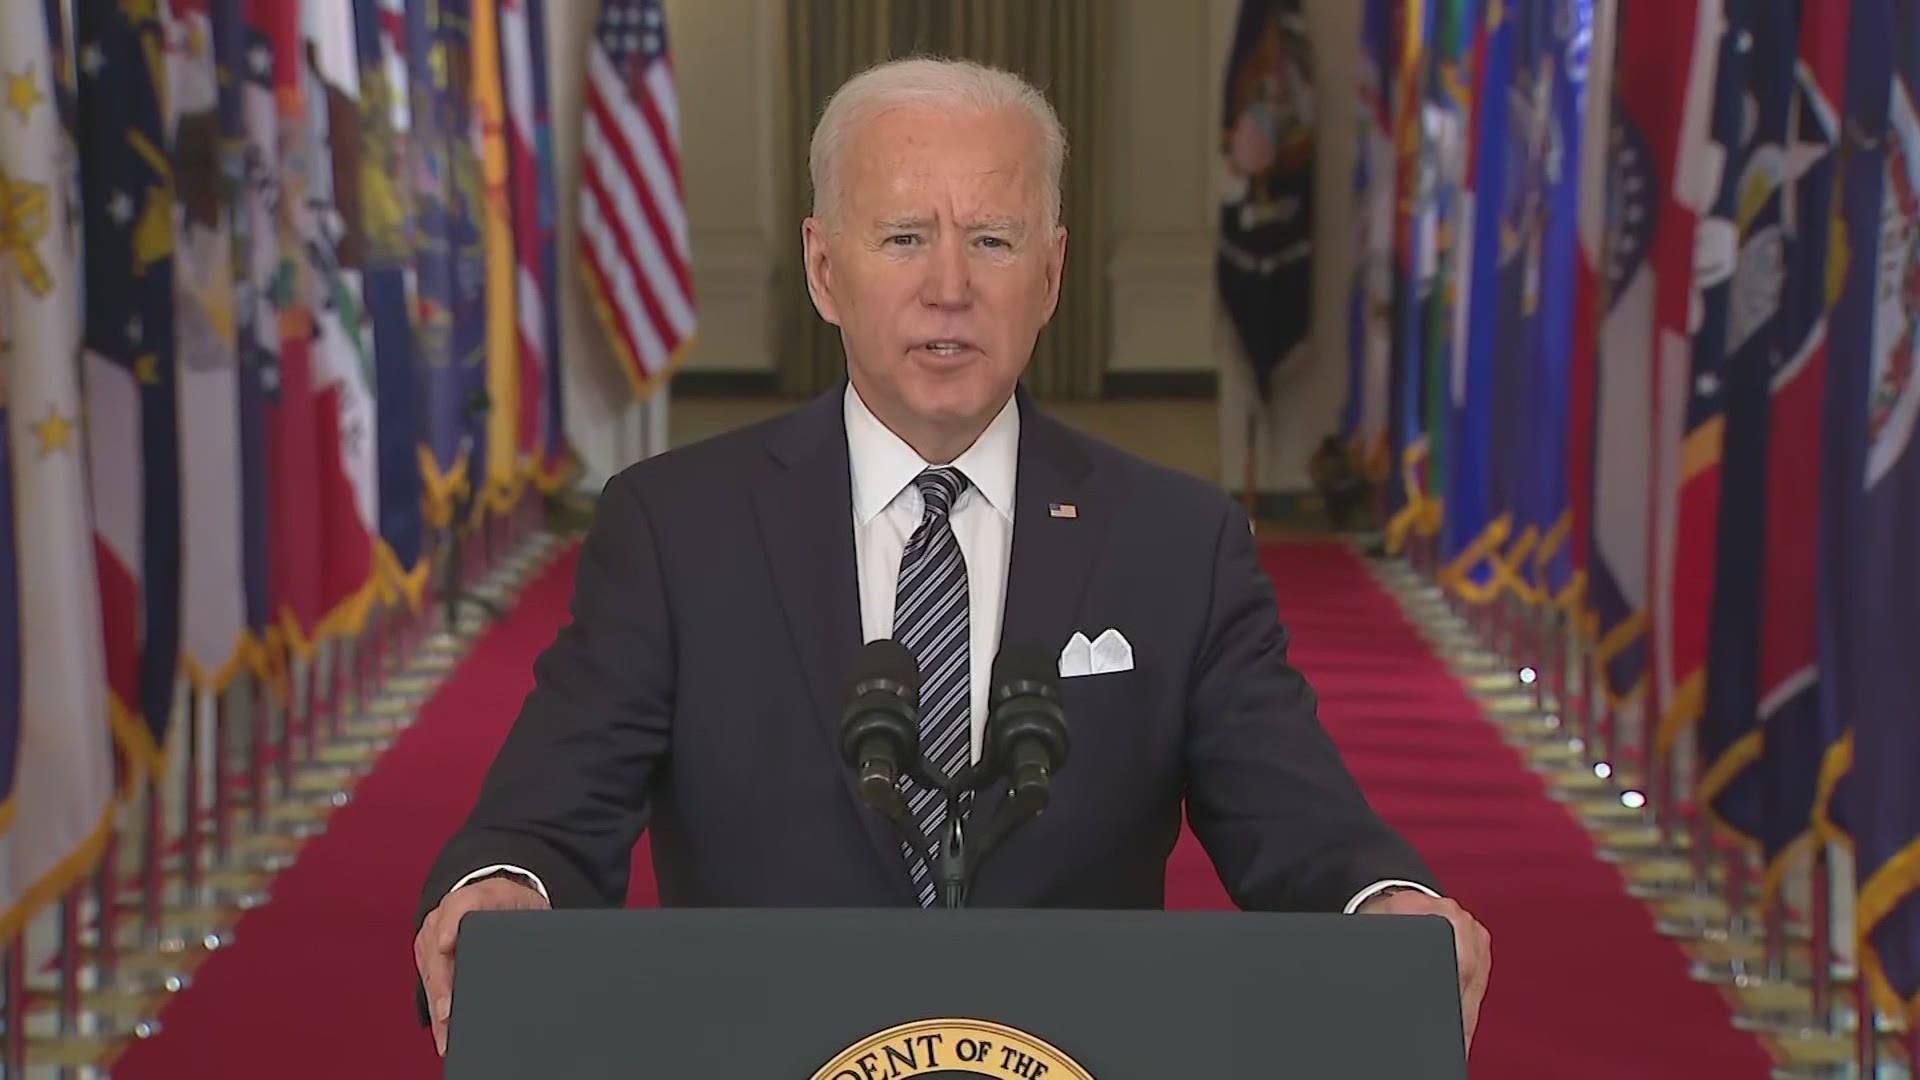 President Biden is aiming for at least small group gatherings by the Fourth of July.